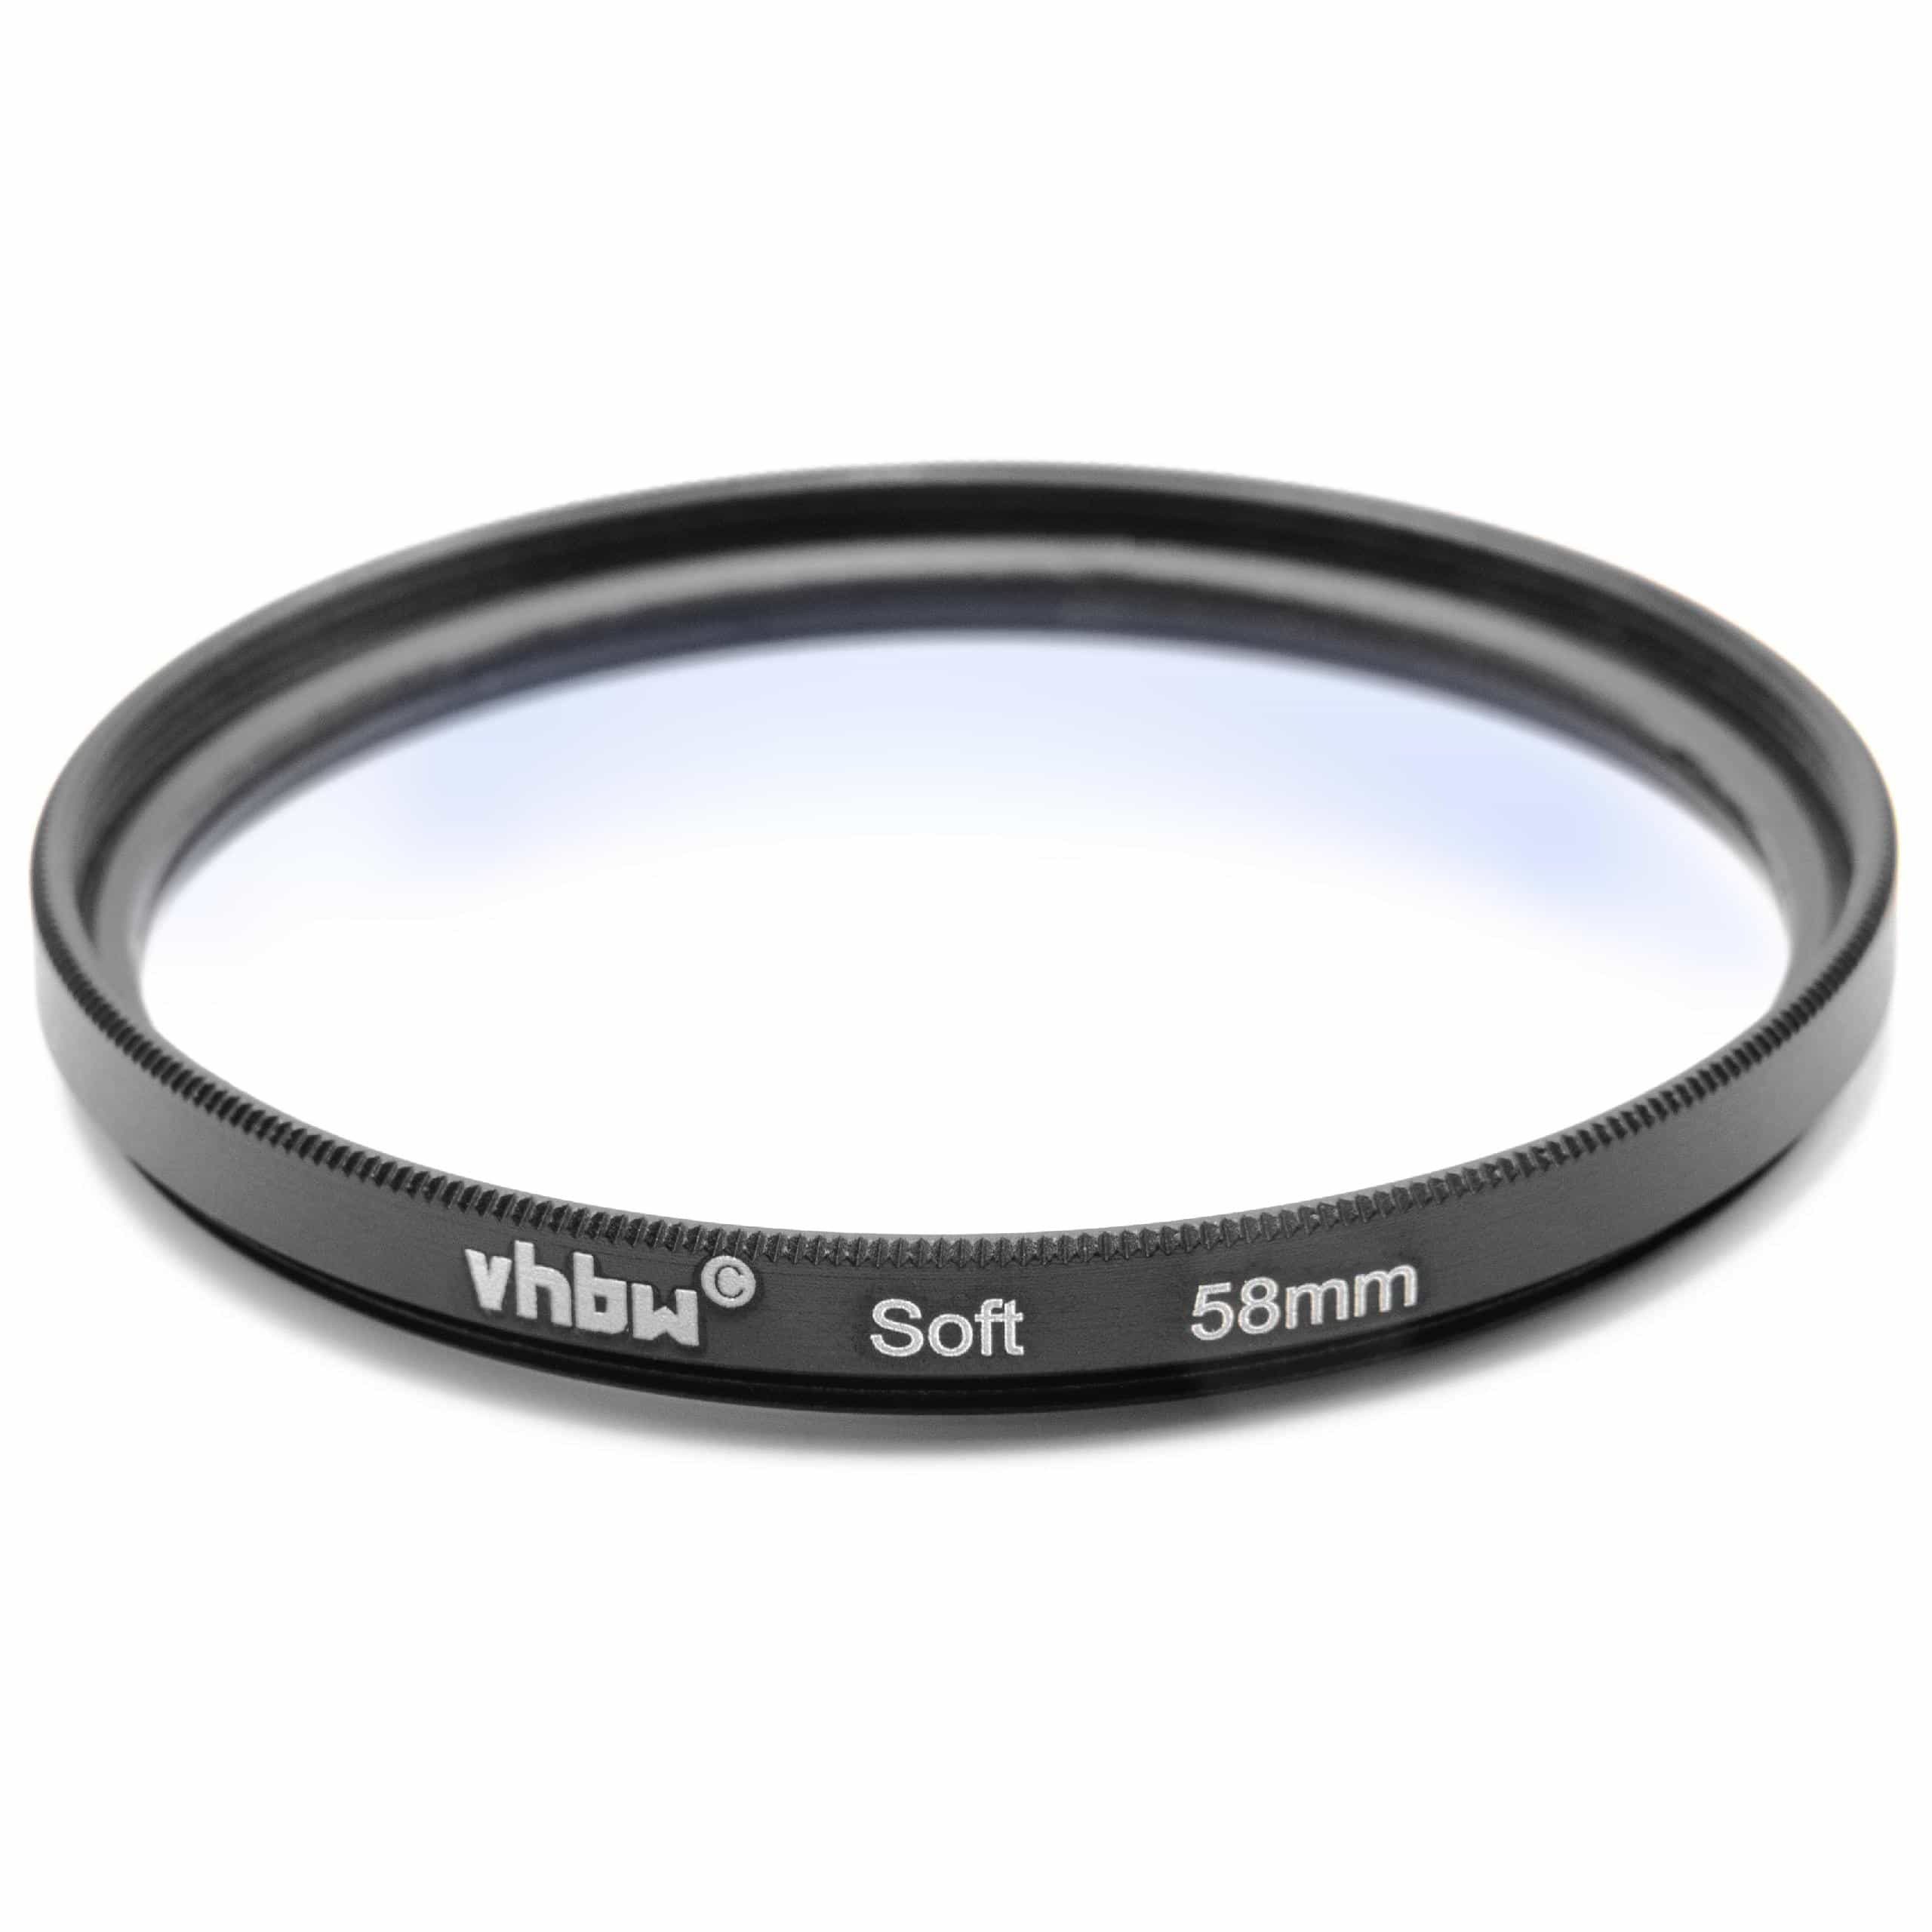 Soft Focus Filter suitable for Cameras & Lenses with 58 mm Filter Thread - Soft Filter